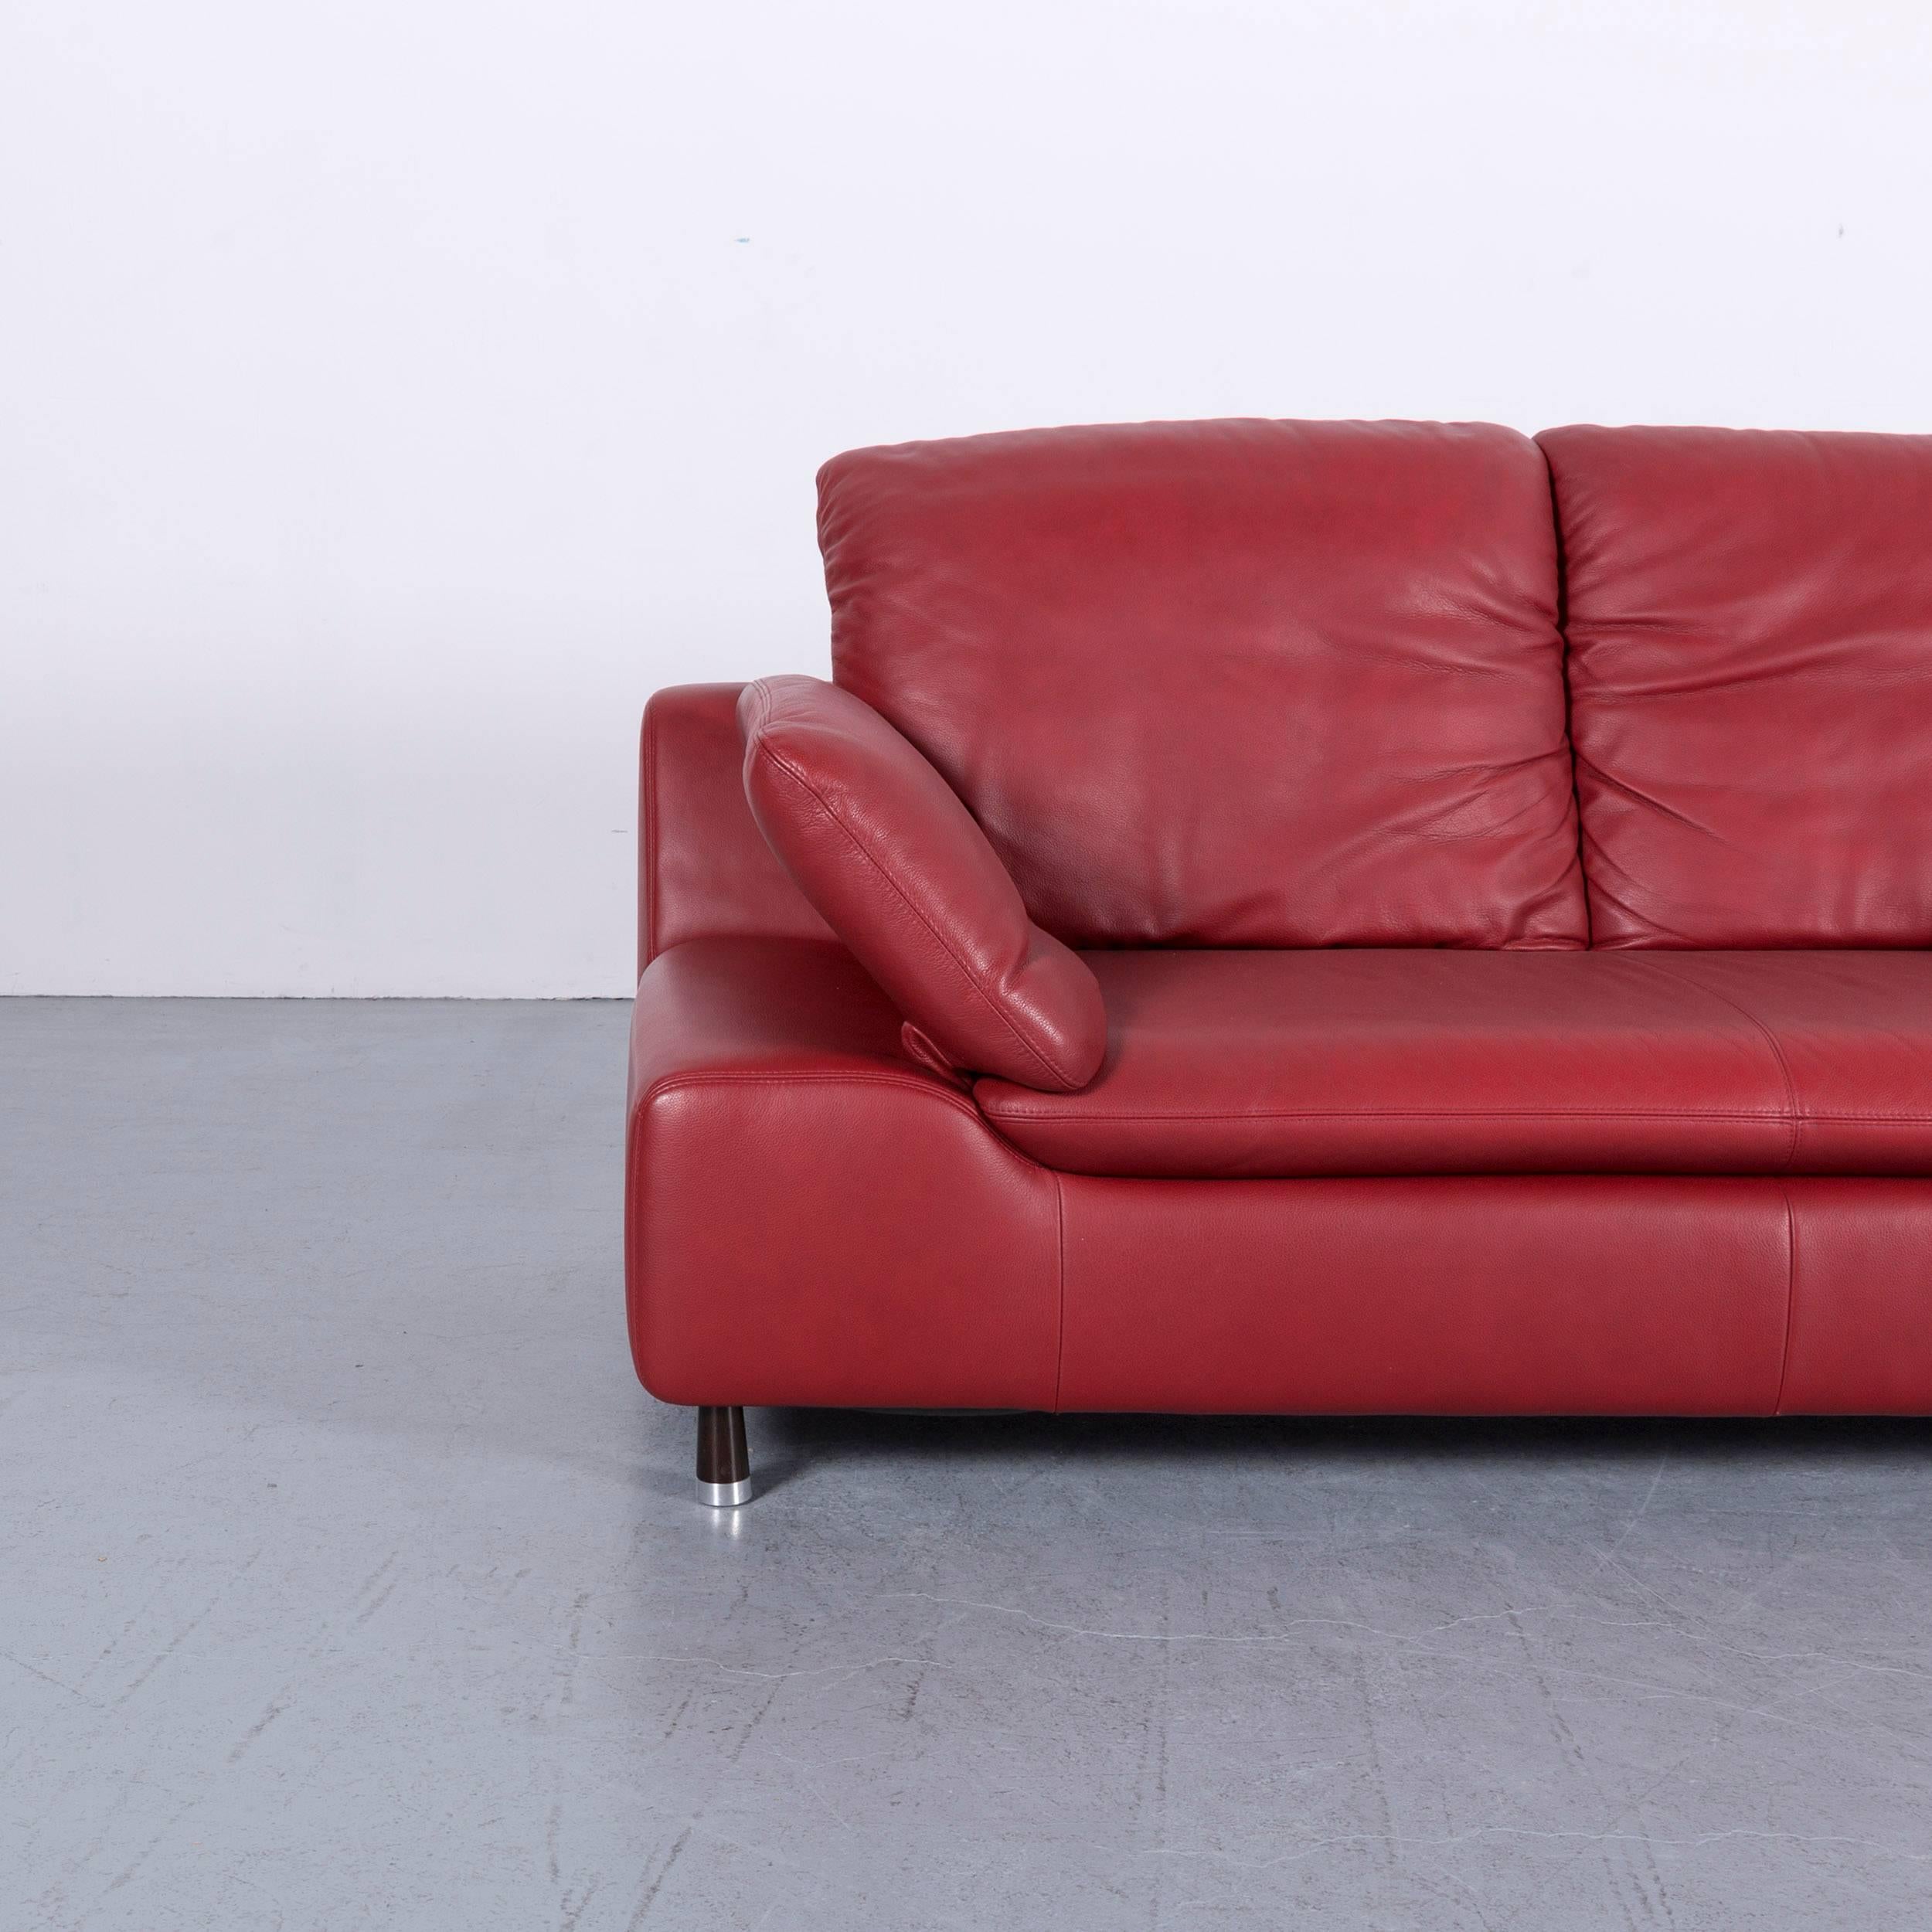 German Willi Schillig Leather Sofa Red Two-Seat Couch